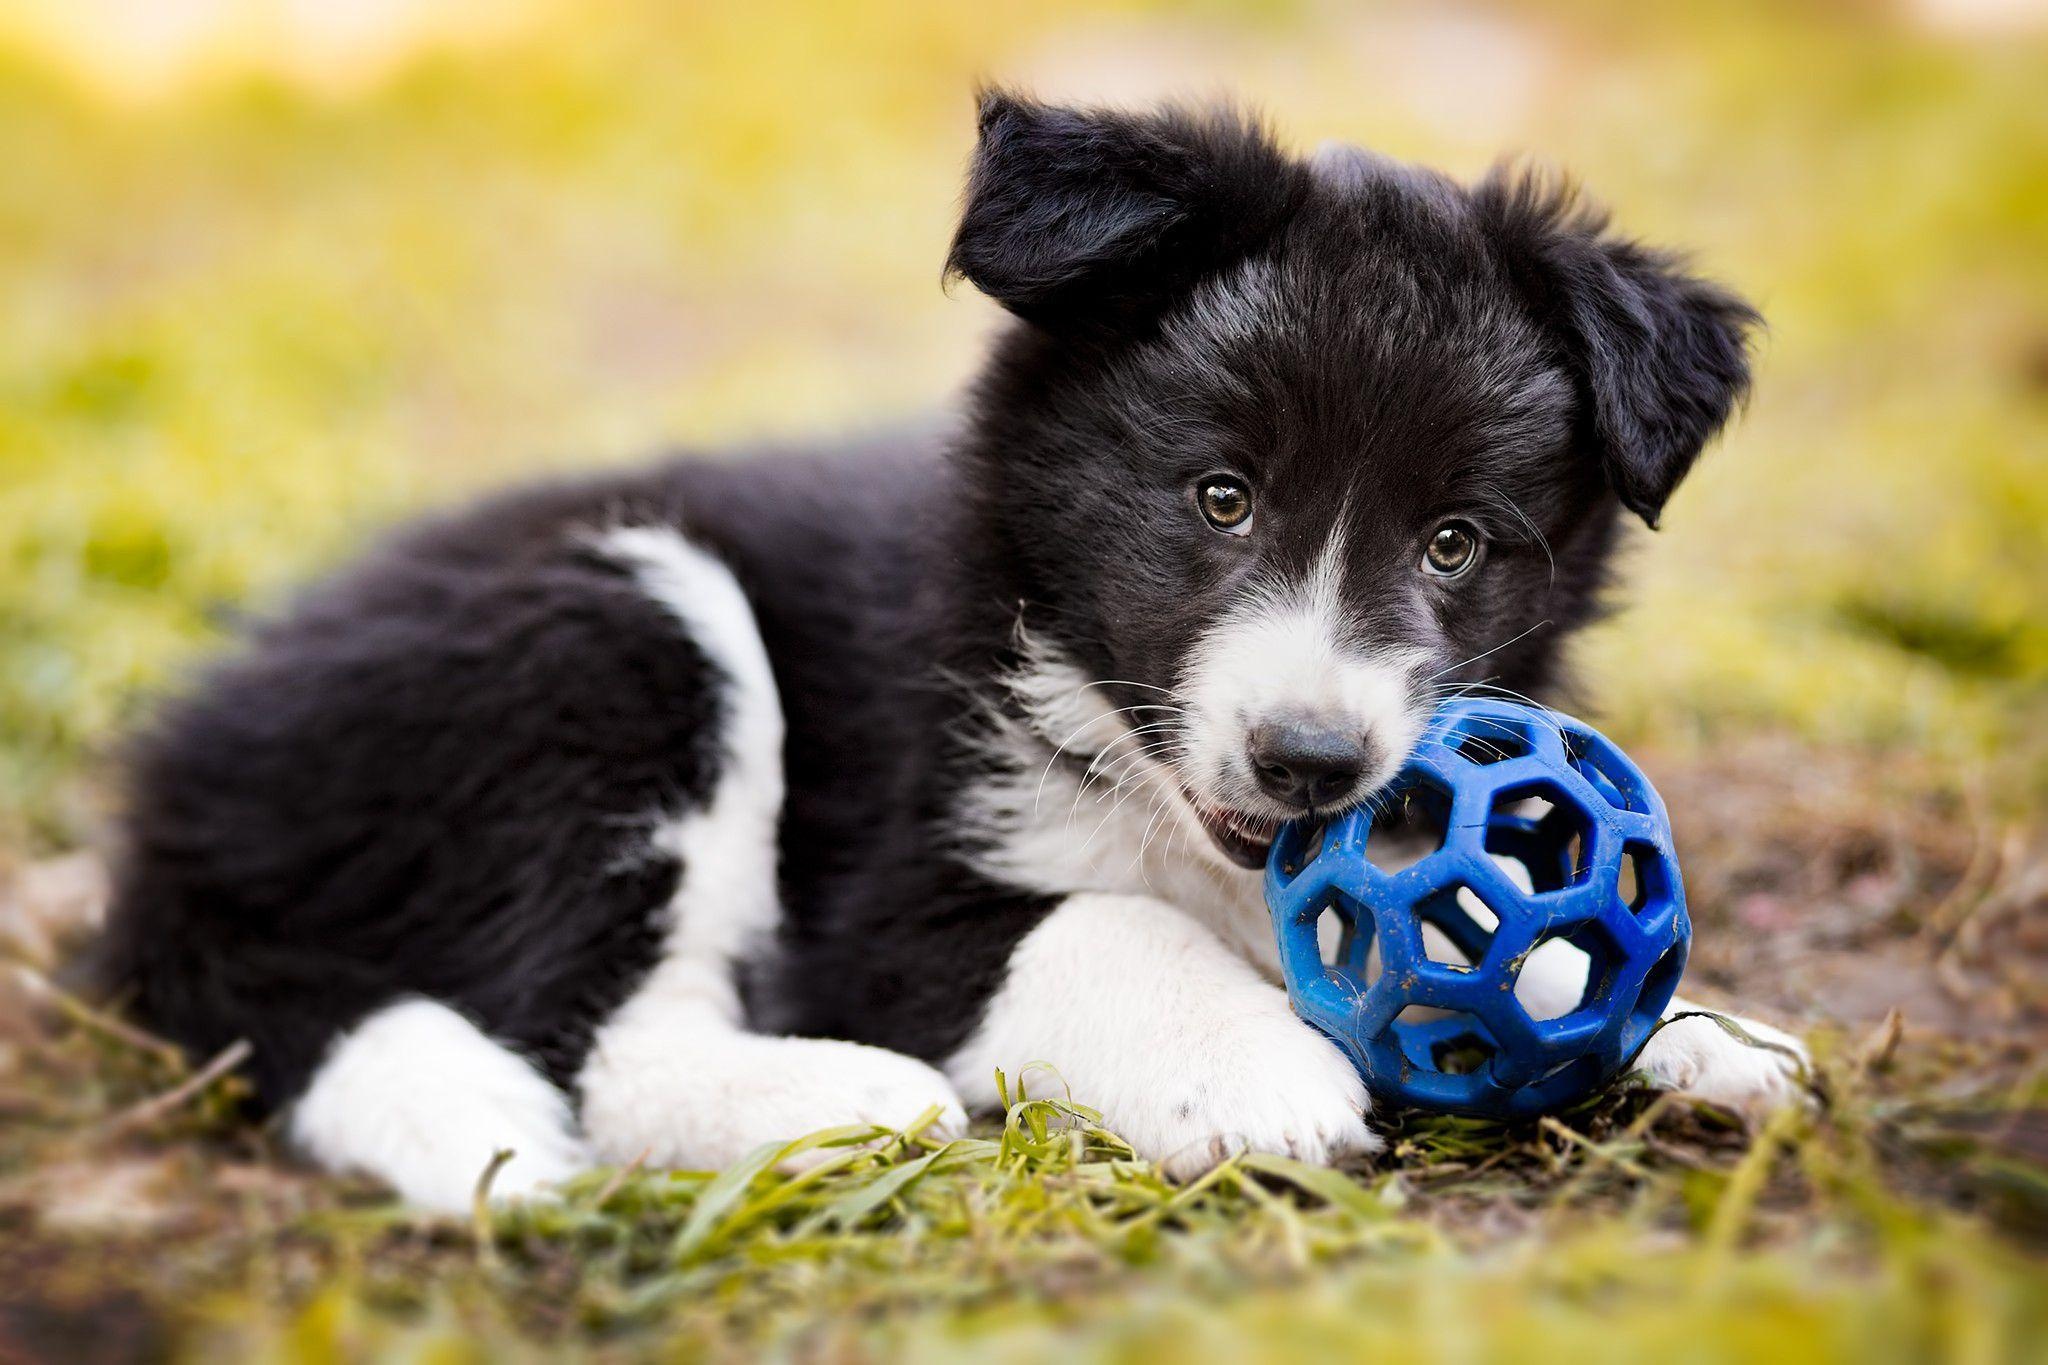 Collie dog wallpapers, Free backgrounds, Canine pets, Cute animals, 2050x1370 HD Desktop